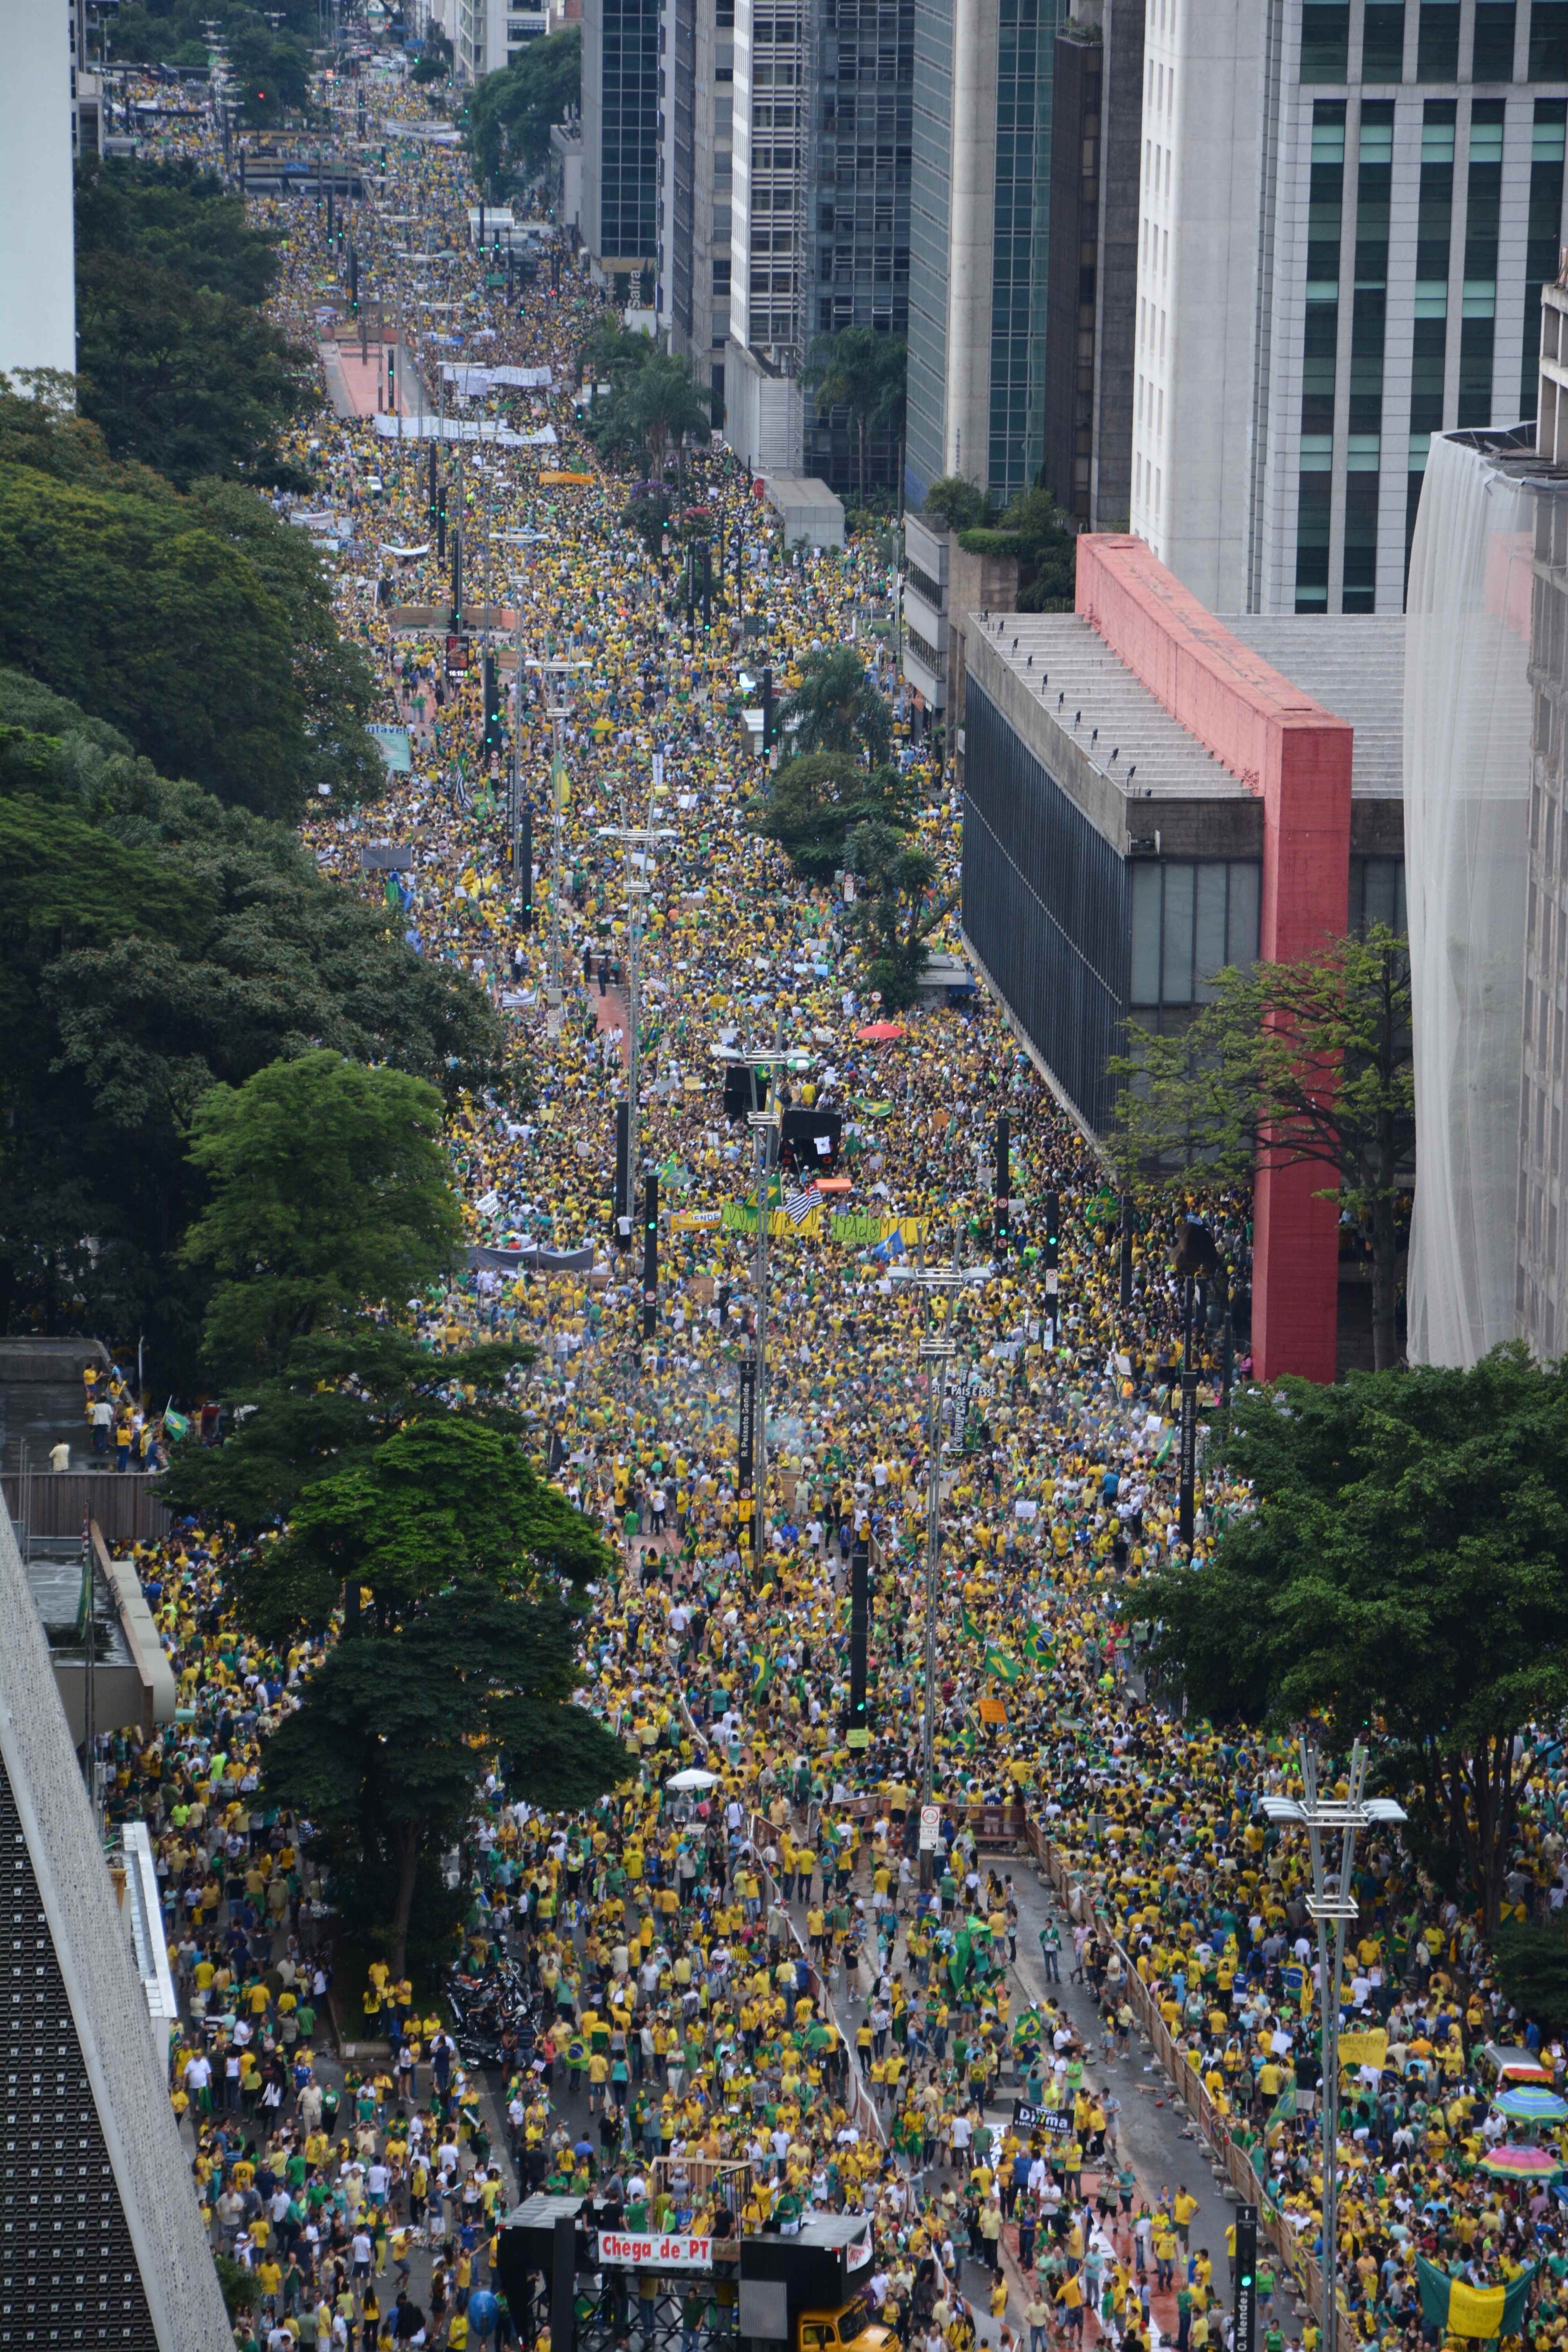 Roughly 1.5 million people protested across Brazil last weekend in response to the Petrobras corruption scandal (Anadolu Agency/Getty)